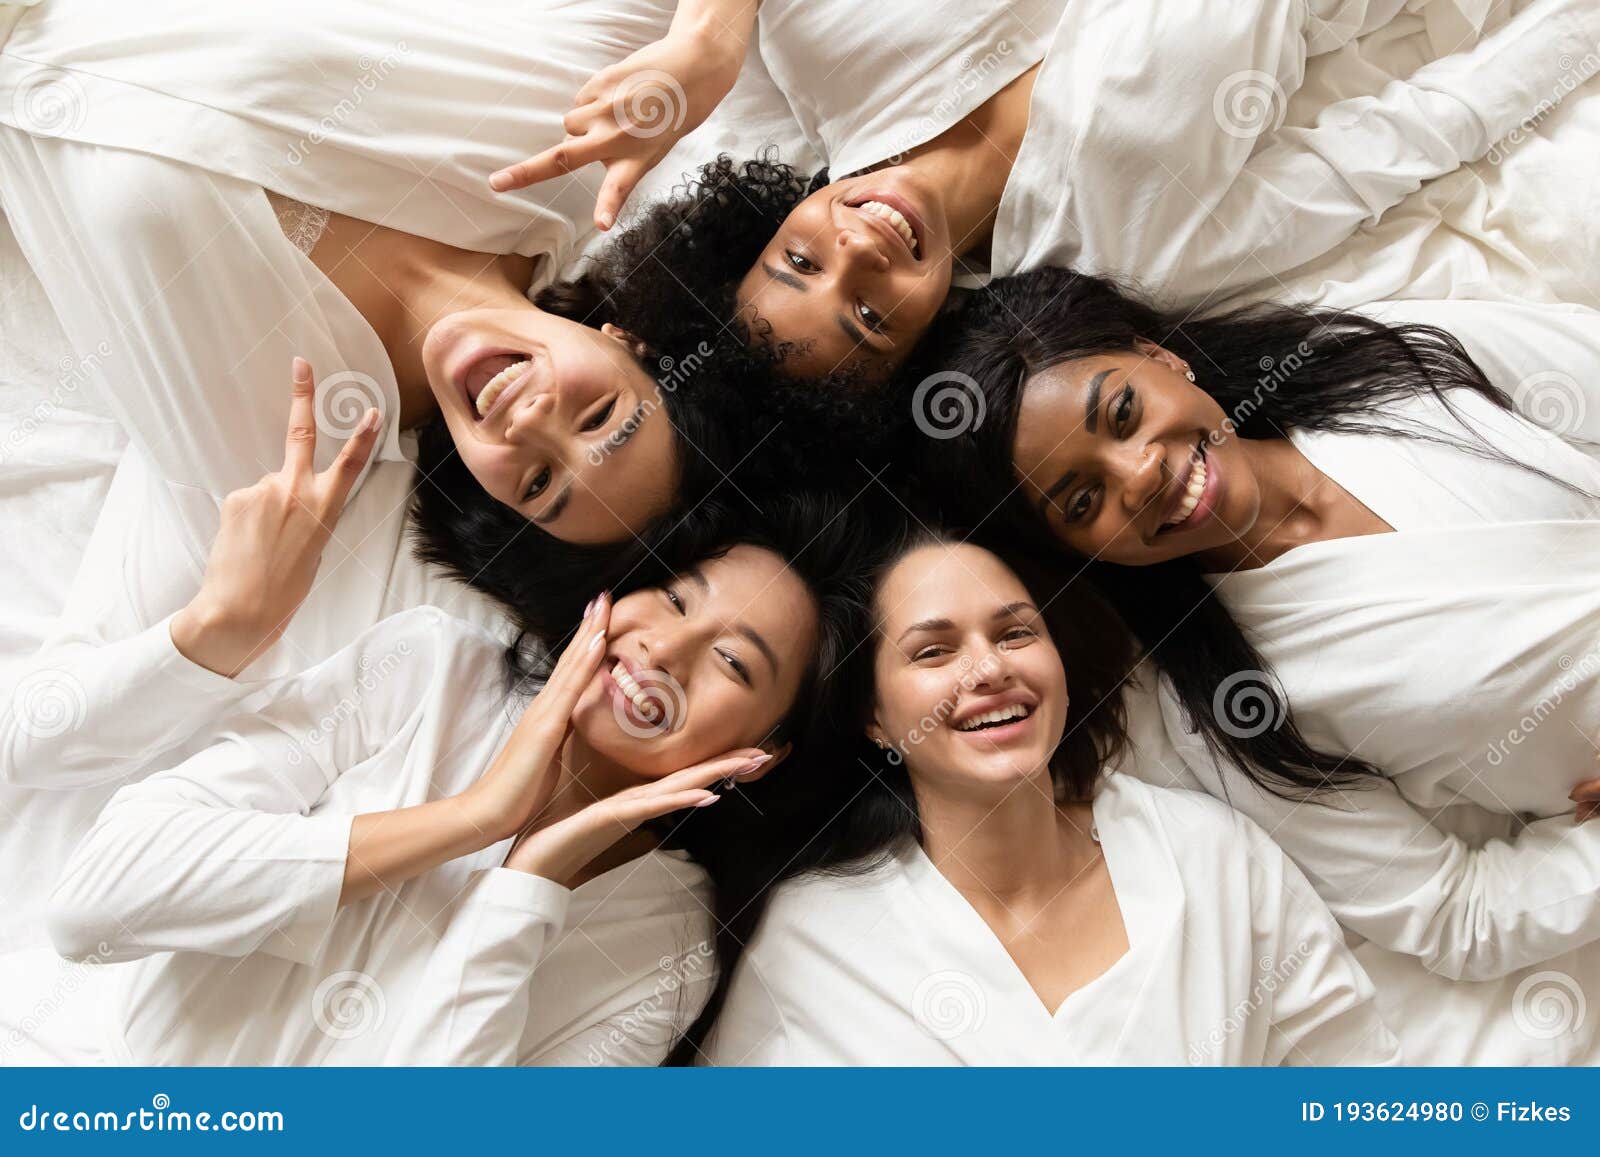 diverse women lying in bed feels happy after spa procedures